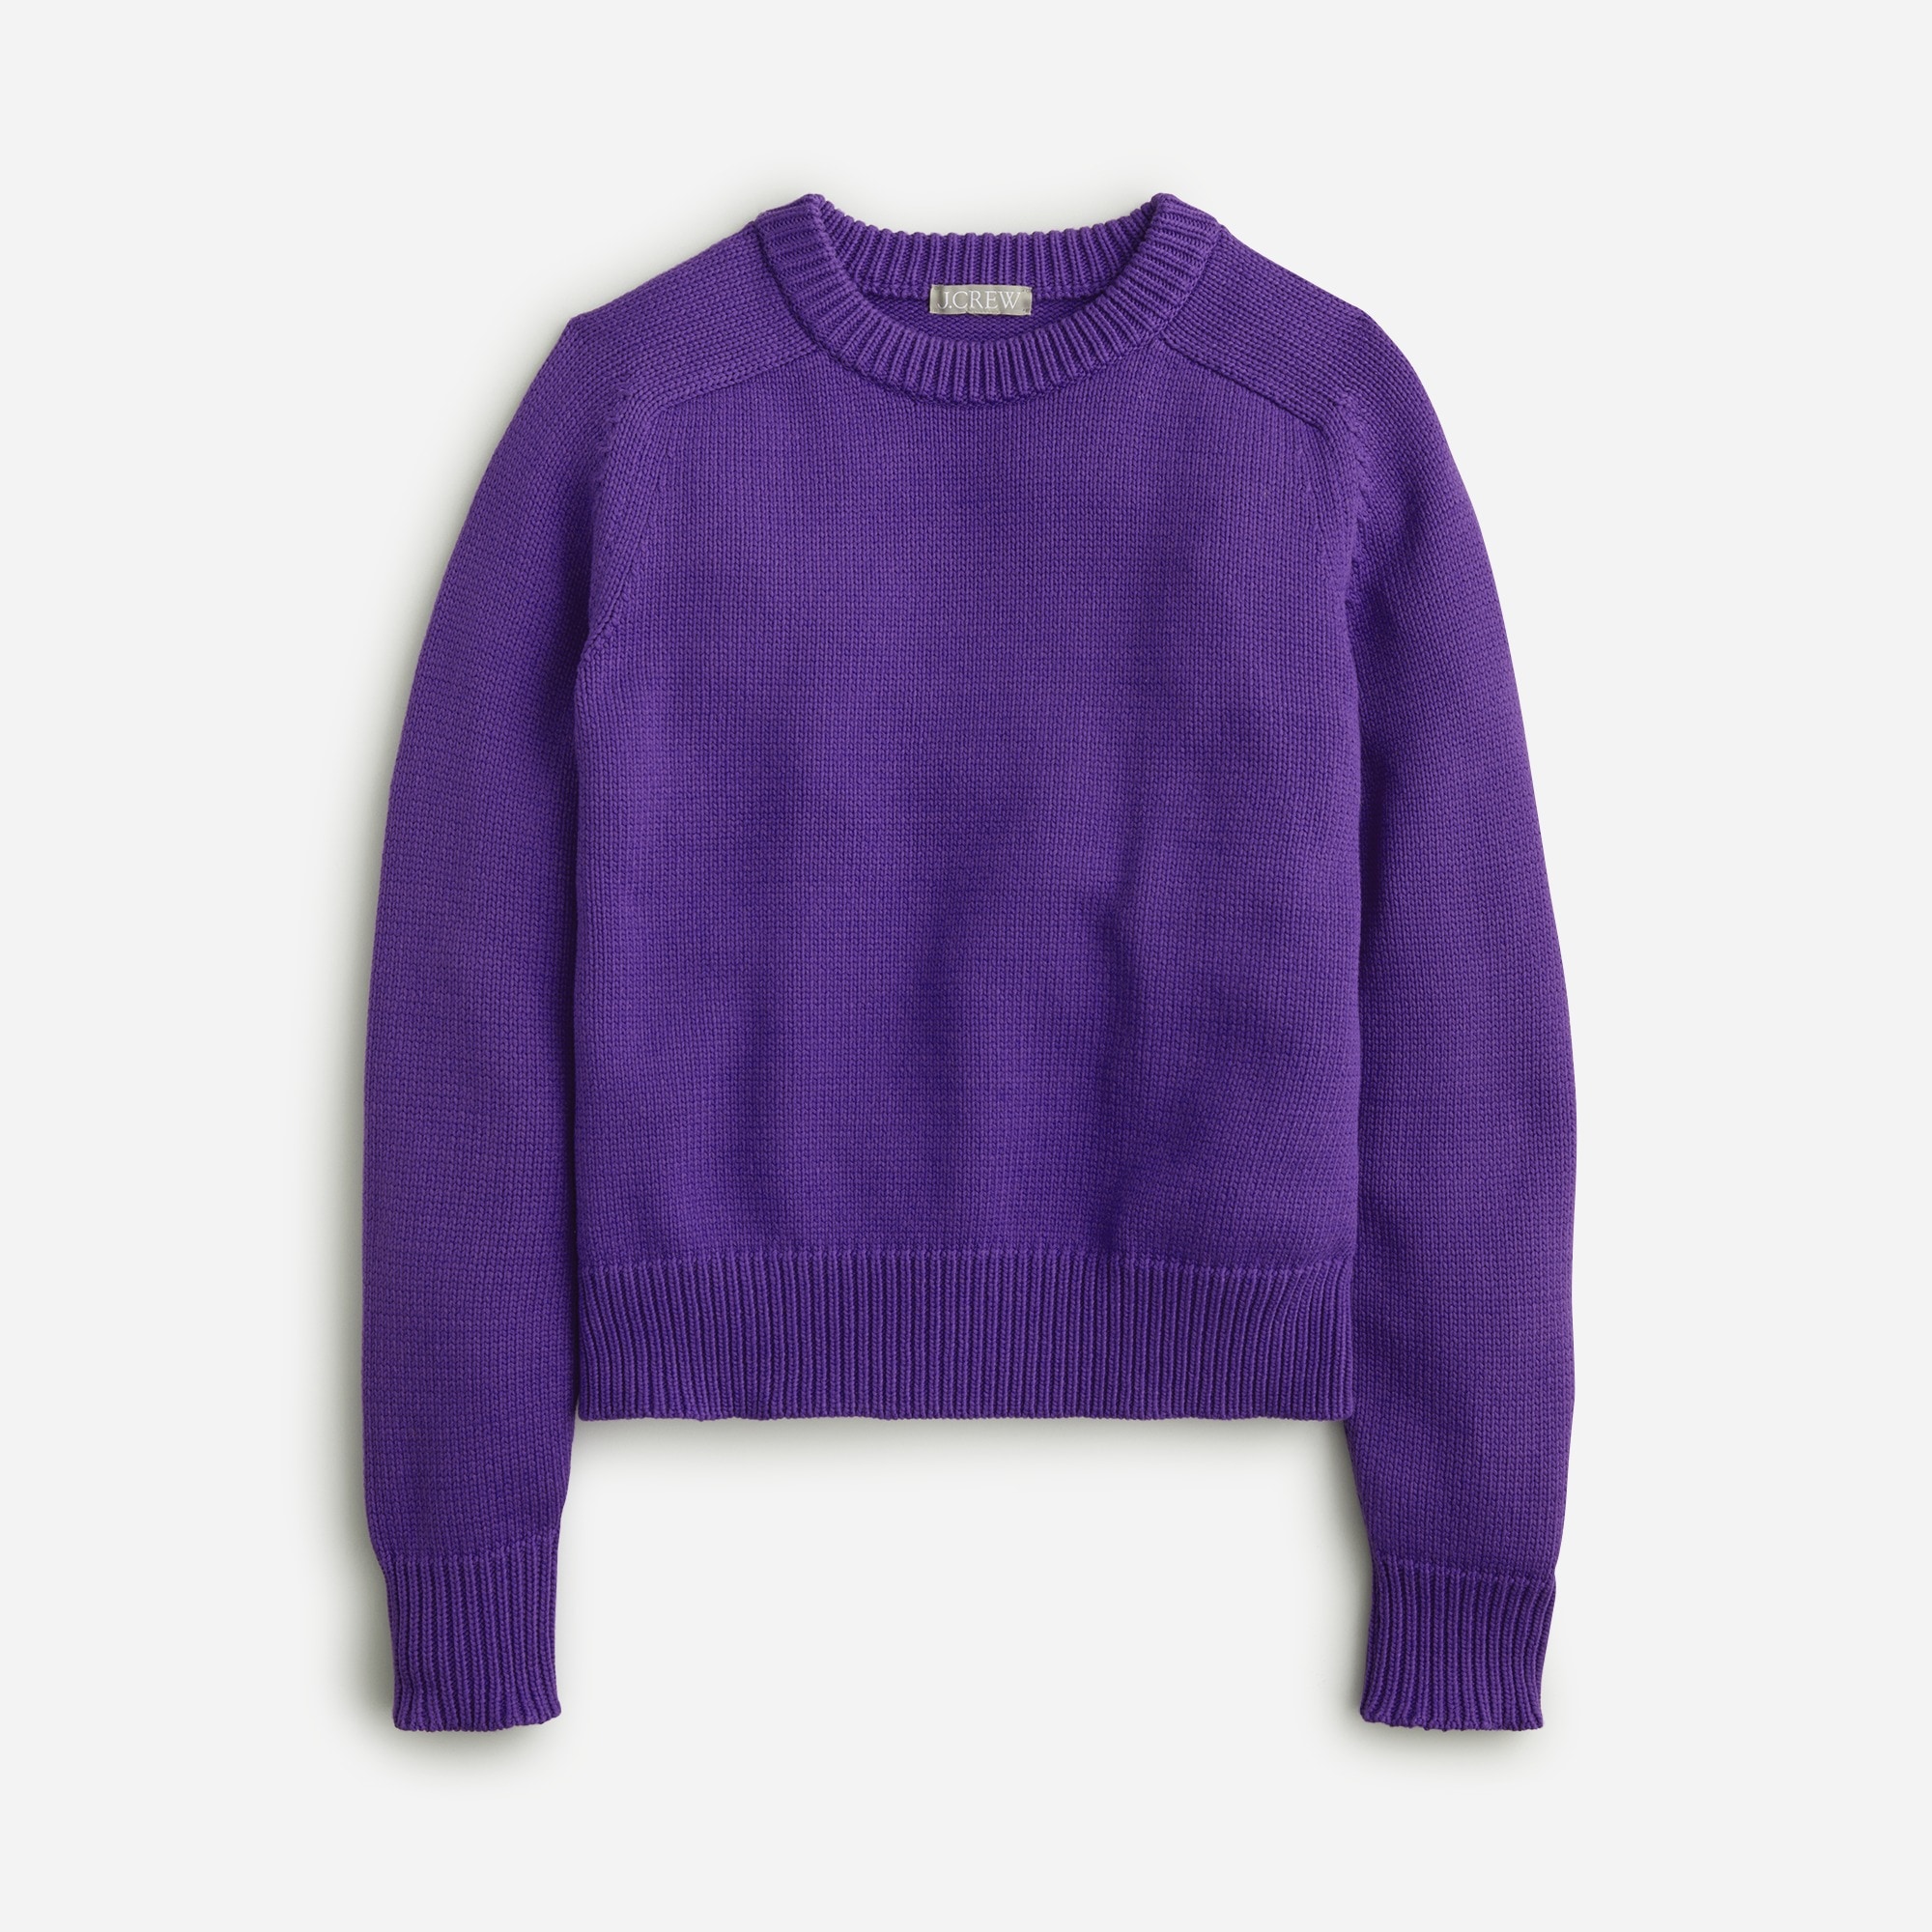 Jcrew Relaxed pullover sweater